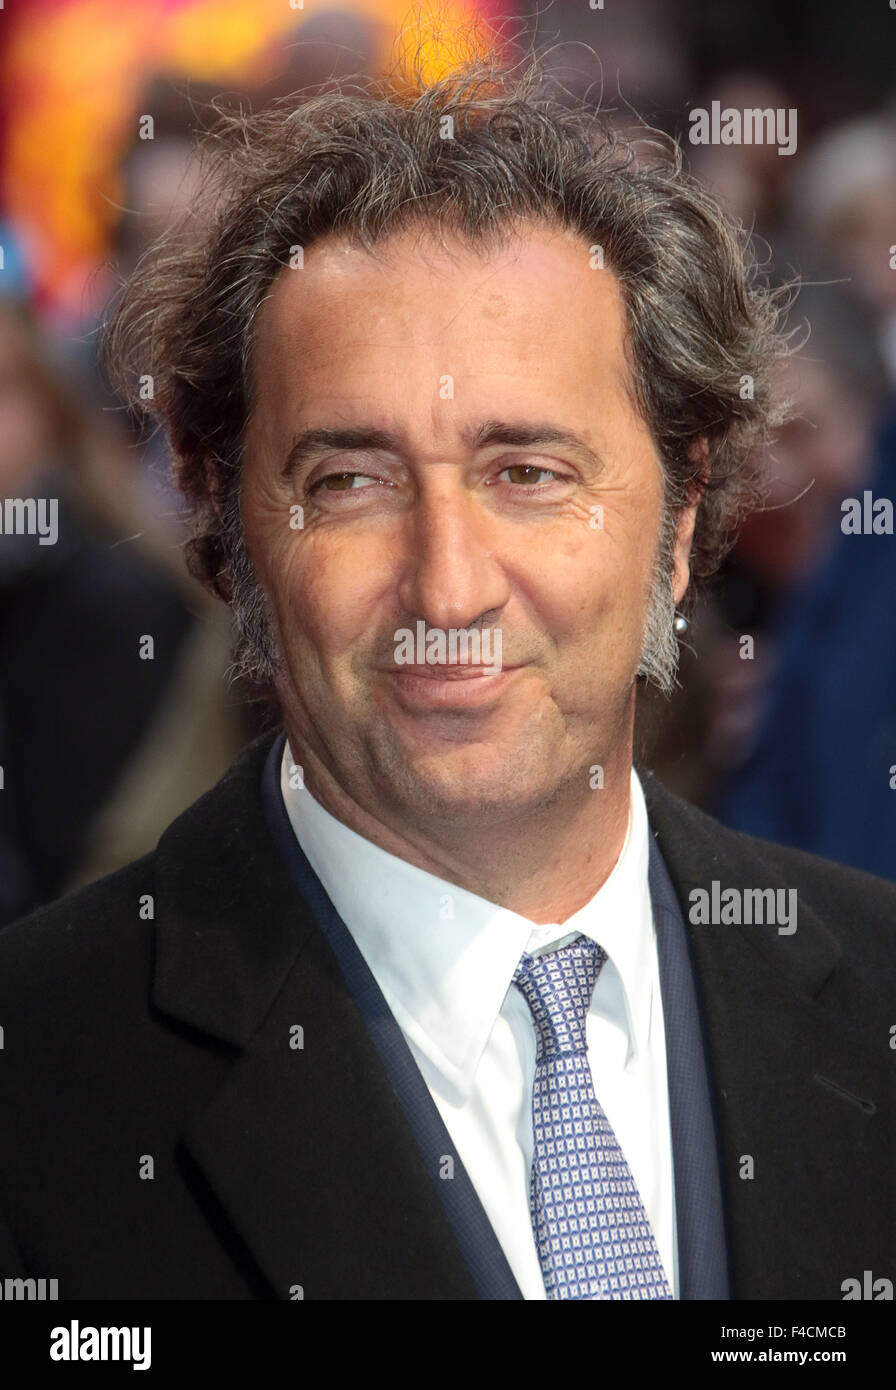 London, UK. October 15, 2015 - Paulo Sorrentino attending 'Youth' screening at BFI London Film Festival at Odeon, Leicester Square in London, UK. Credit:  Stills Press/Alamy Live News Stock Photo